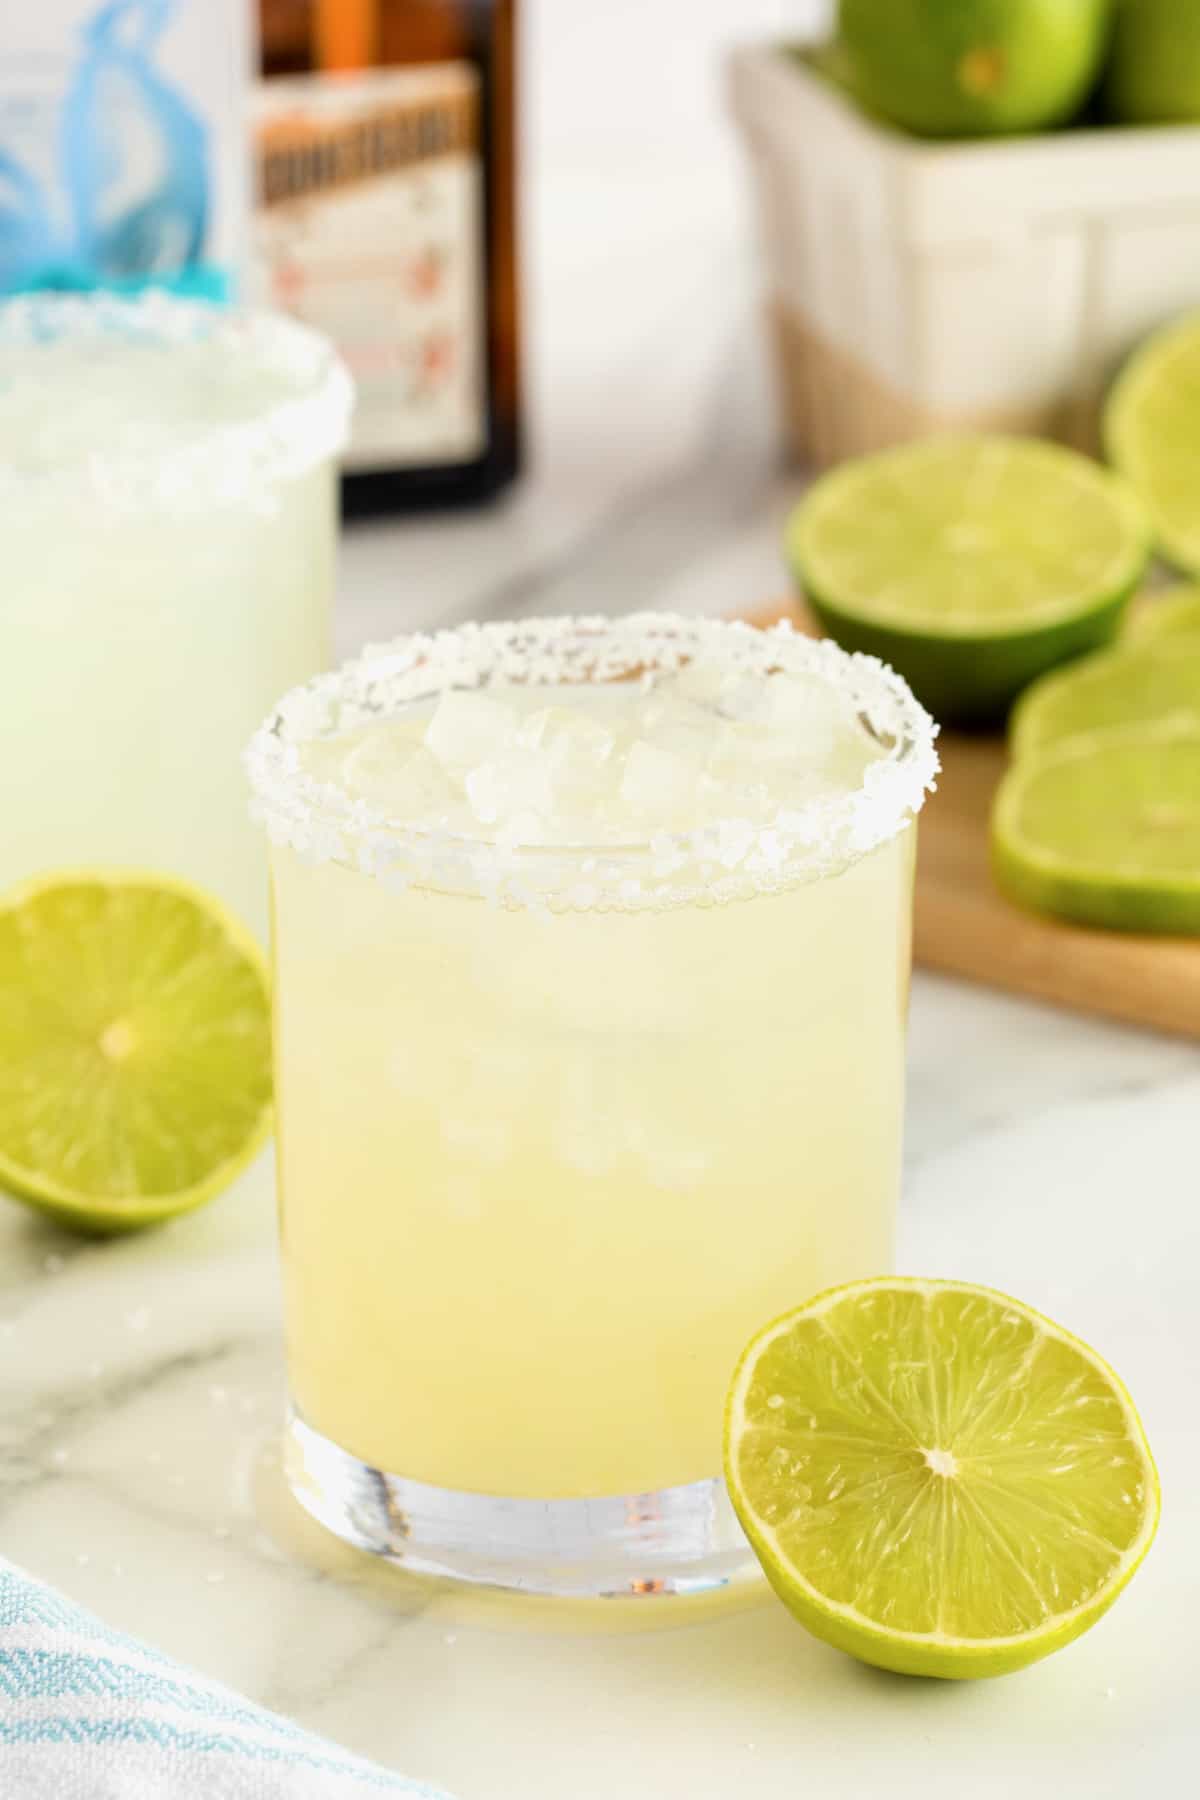 A salt rimmed glass filled with margarita on a white marble counter.